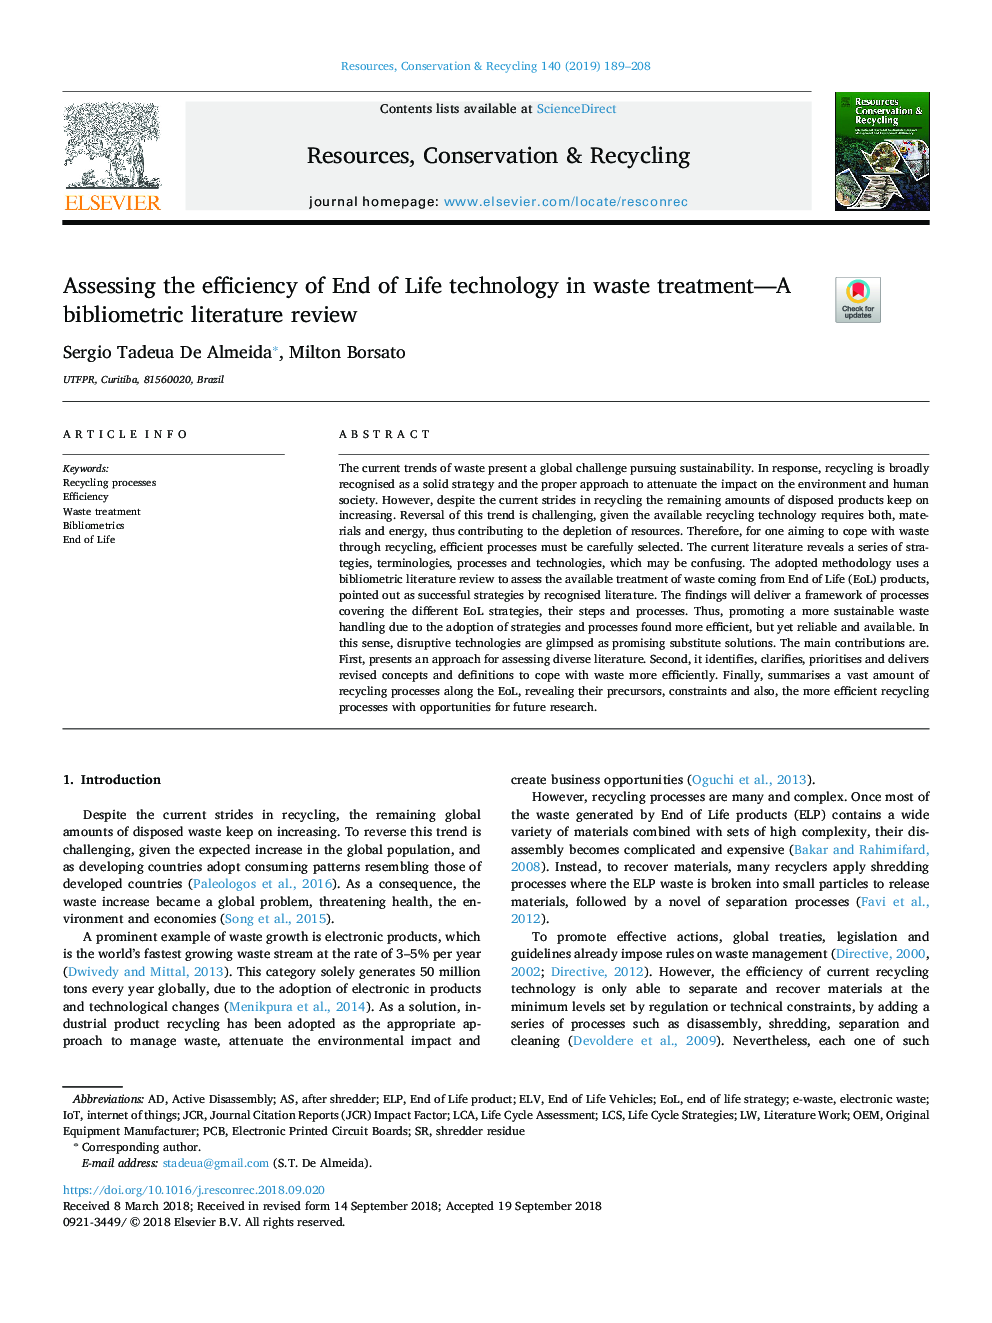 Assessing the efficiency of End of Life technology in waste treatment-A bibliometric literature review